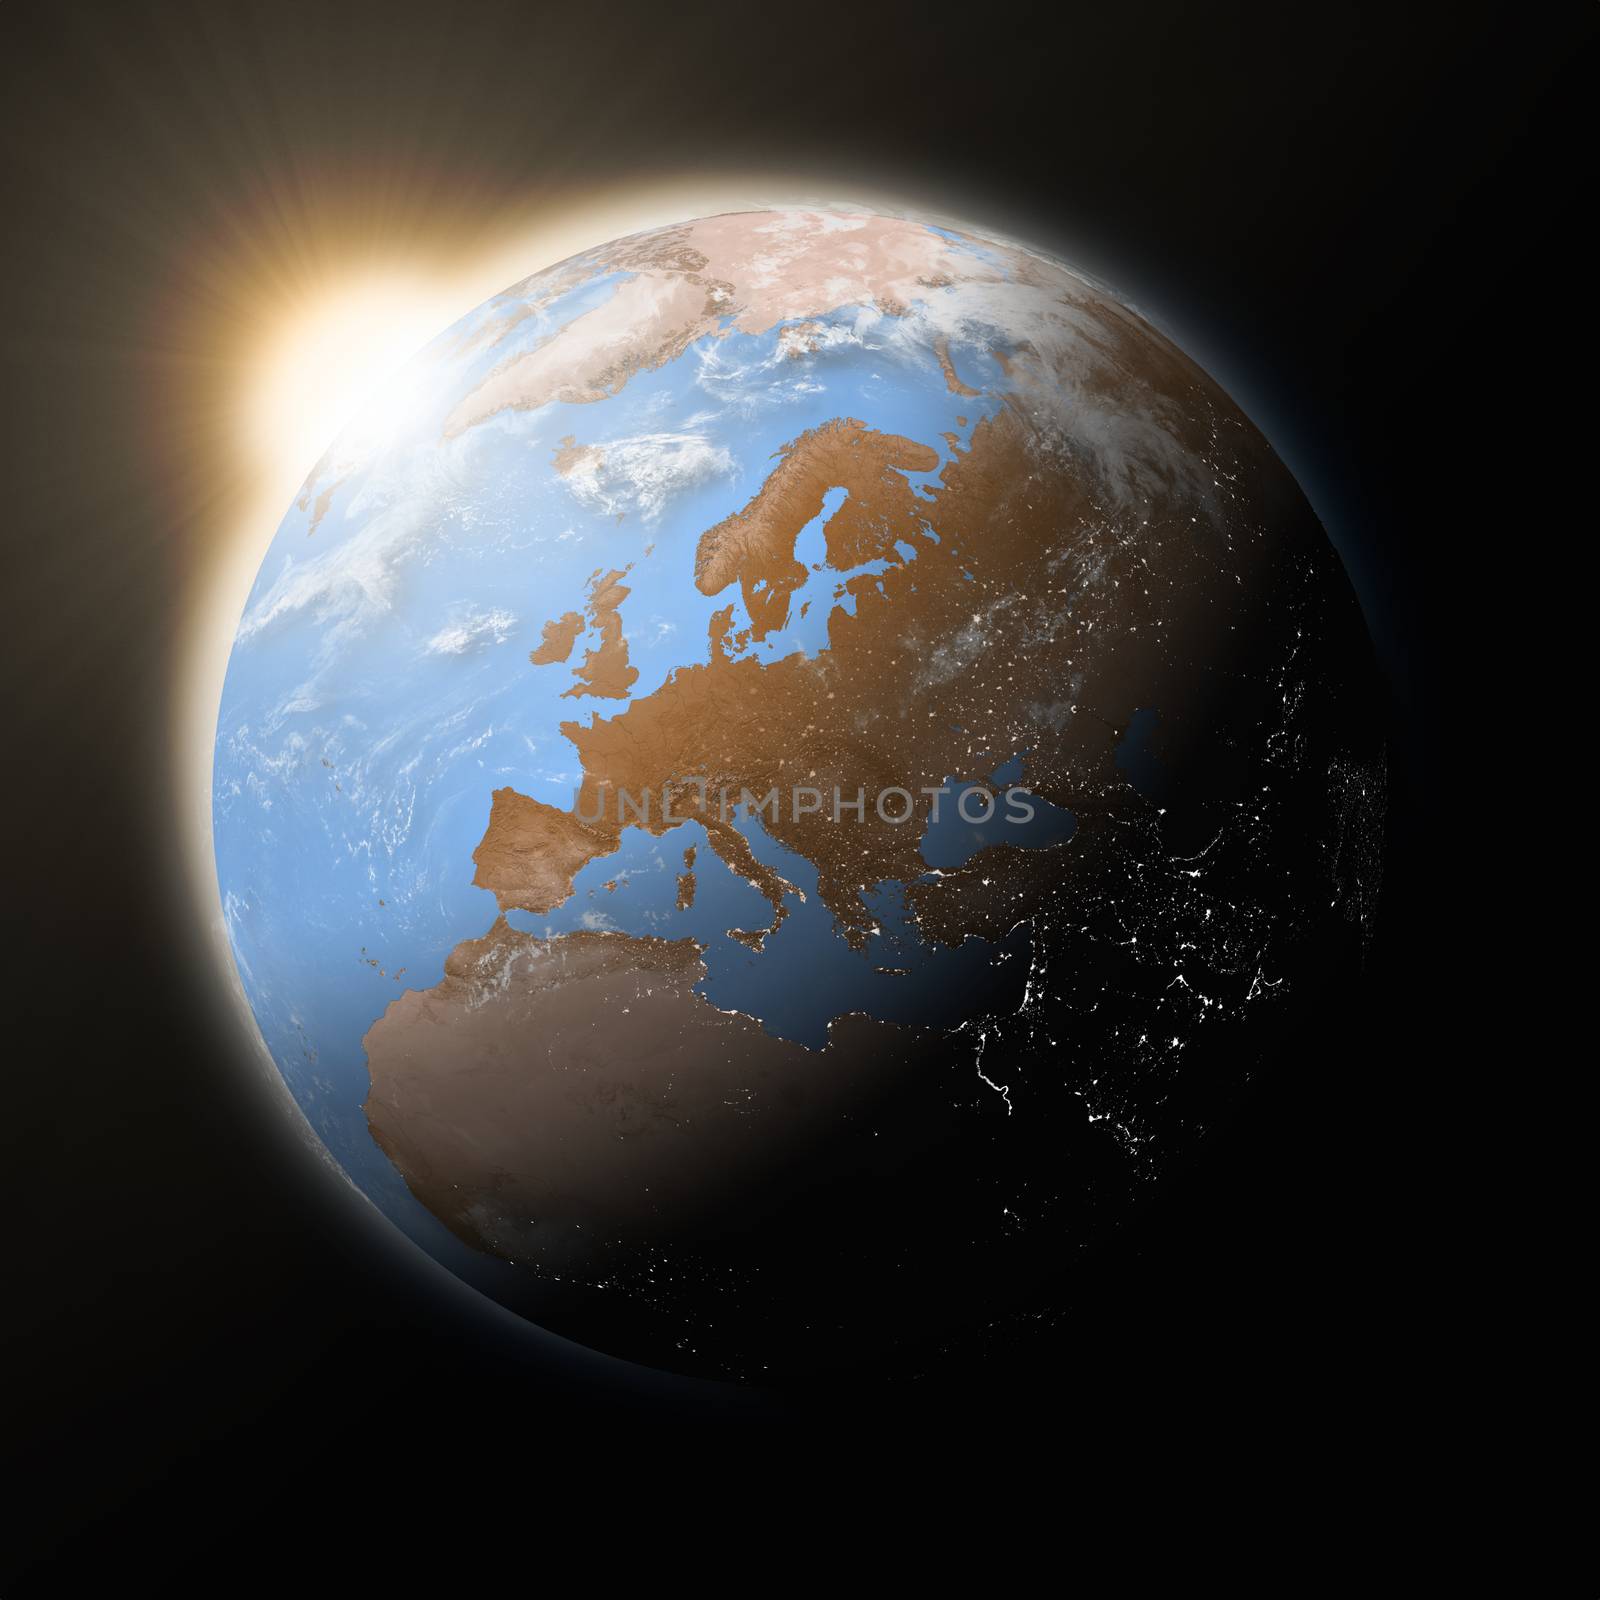 Sun over Europe on blue planet Earth isolated on black background. Elements of this image furnished by NASA.